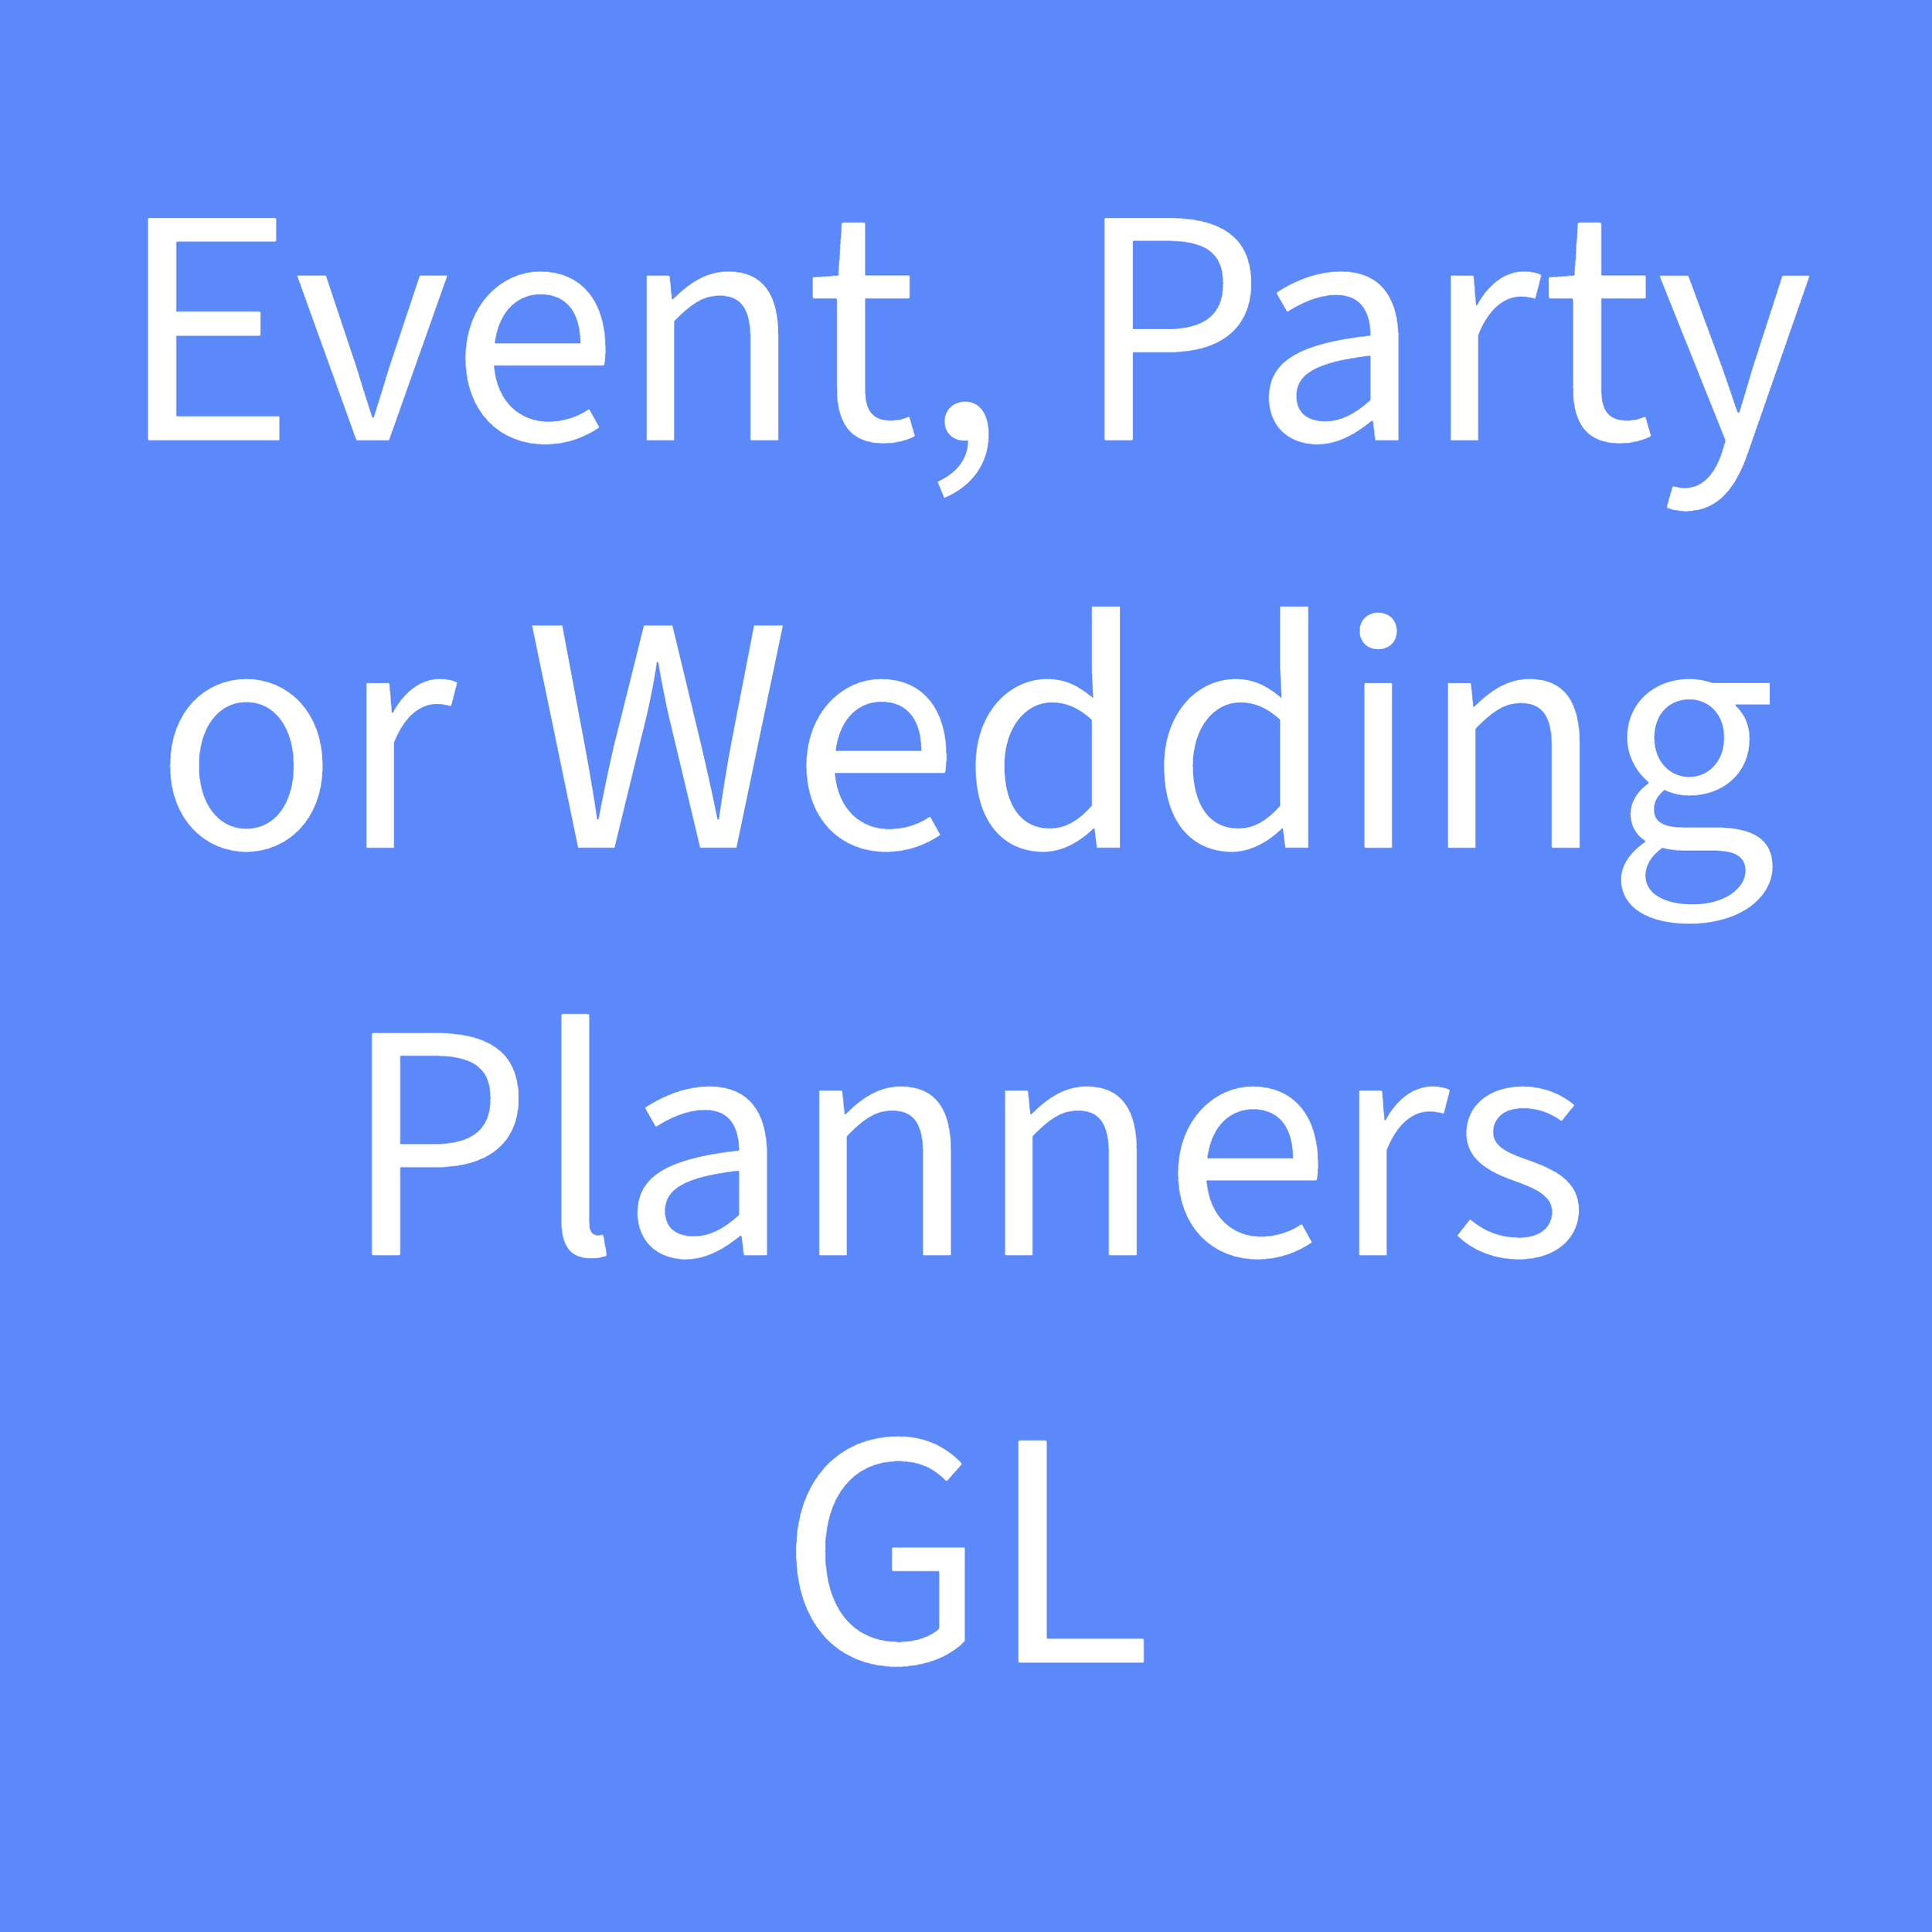 Event, Party or Wedding Planners GL 